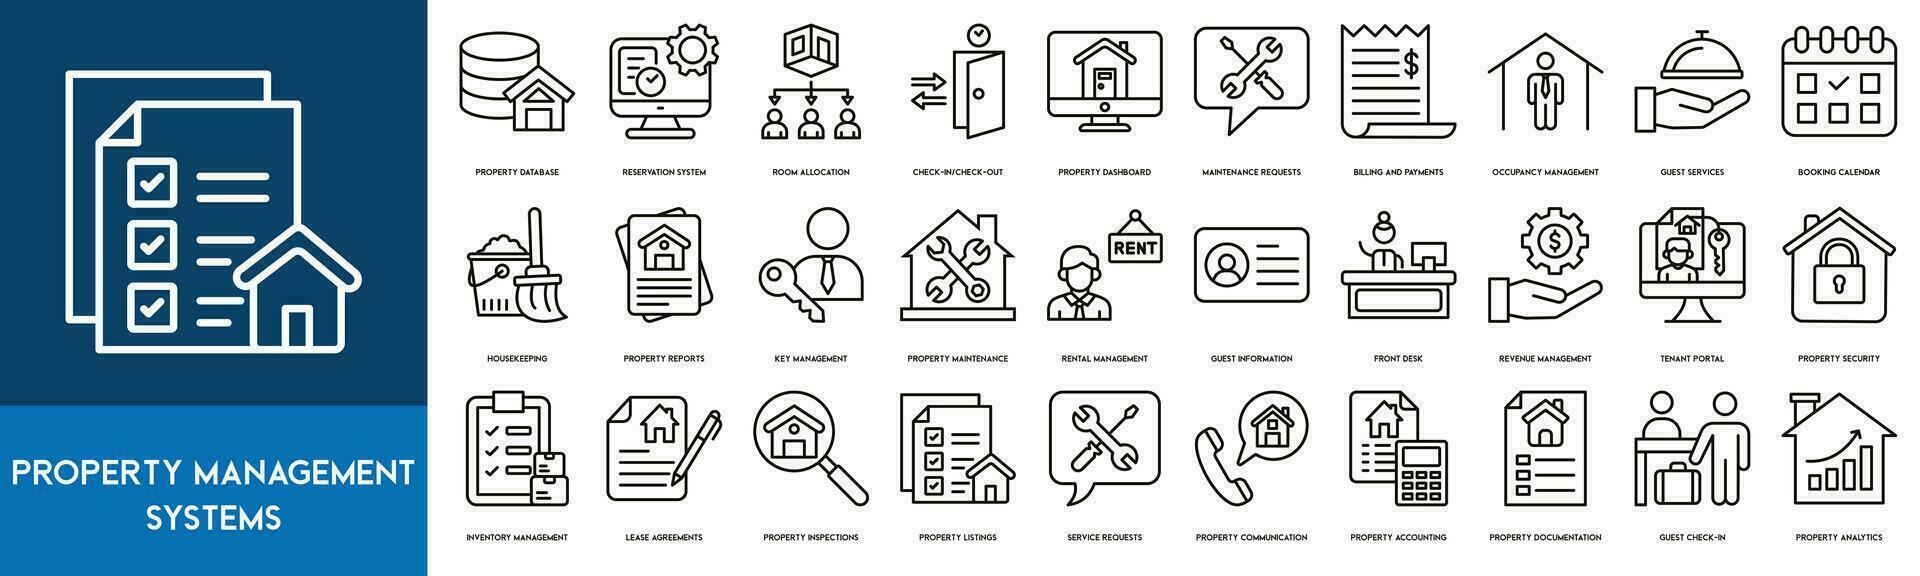 Property Management Systems Outline Icon Collection. Property Database, Reservation System, Room Allocation, Property Dashboard, Maintenance Requests, Check In and Check Out, Billing and Payments vector